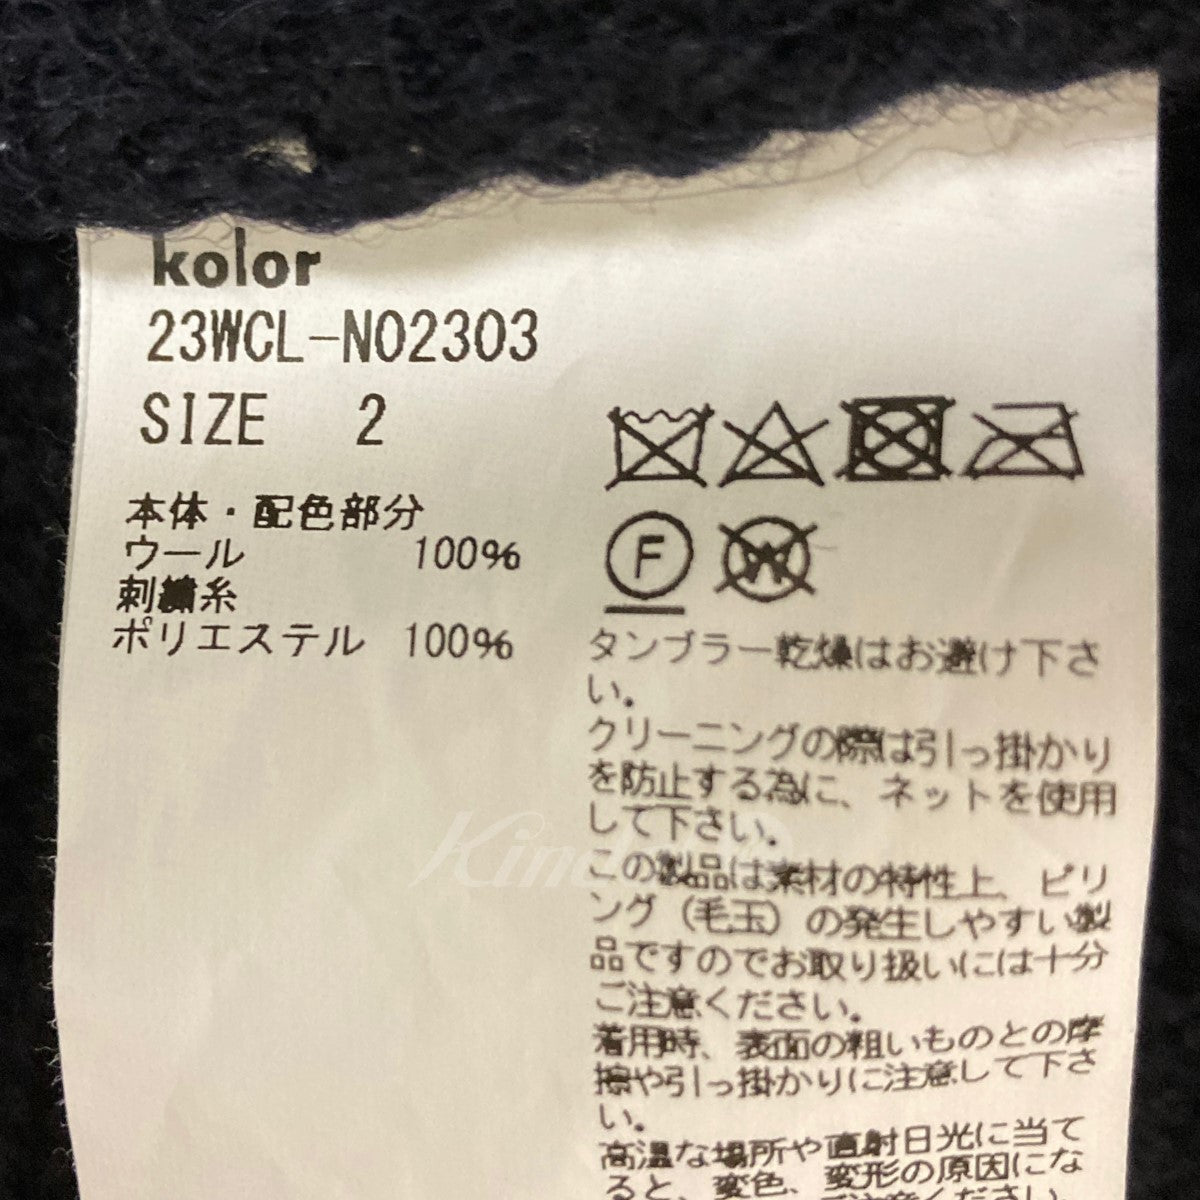 kolor(カラー) 23AW ドッキングニットベスト 23WCL-N02303 23WCL ...